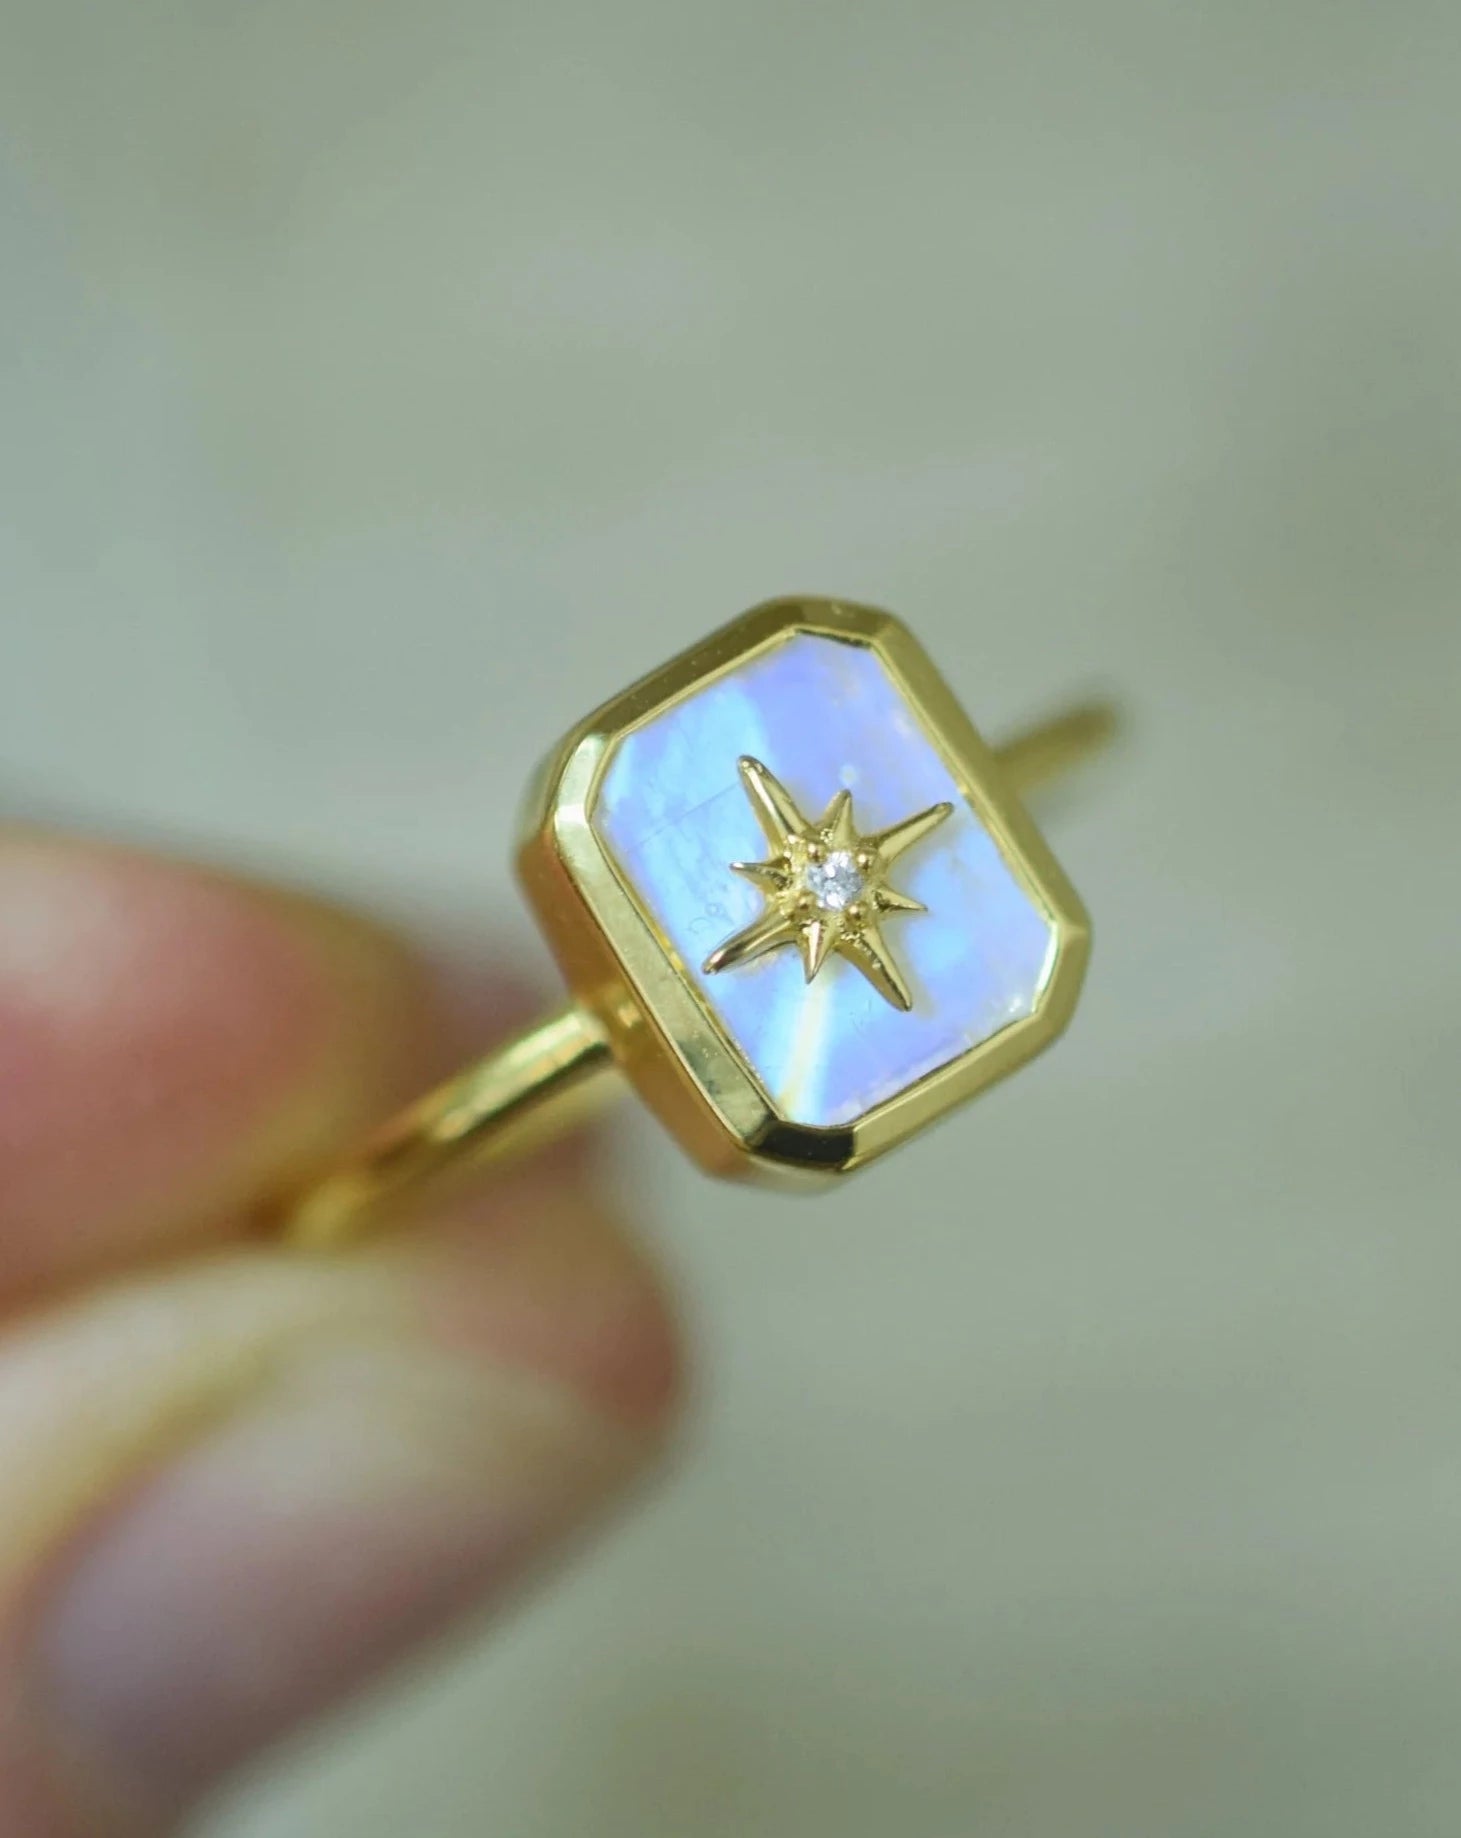 Wish upon a Star Ring from La Kaiser Jewellery